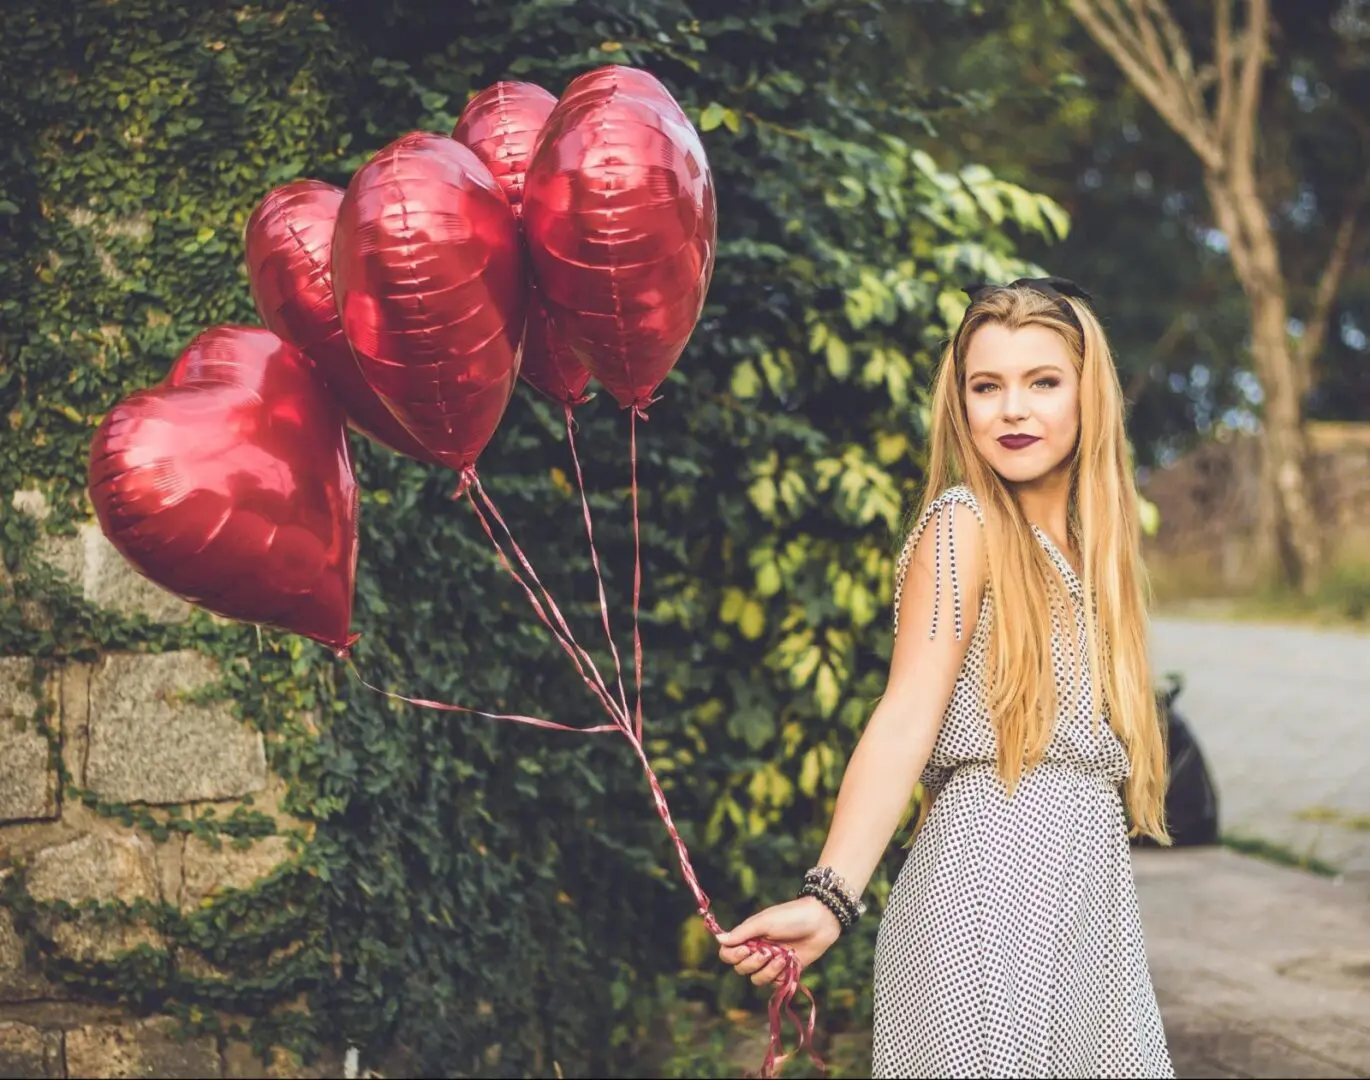 A woman holding onto some red balloons